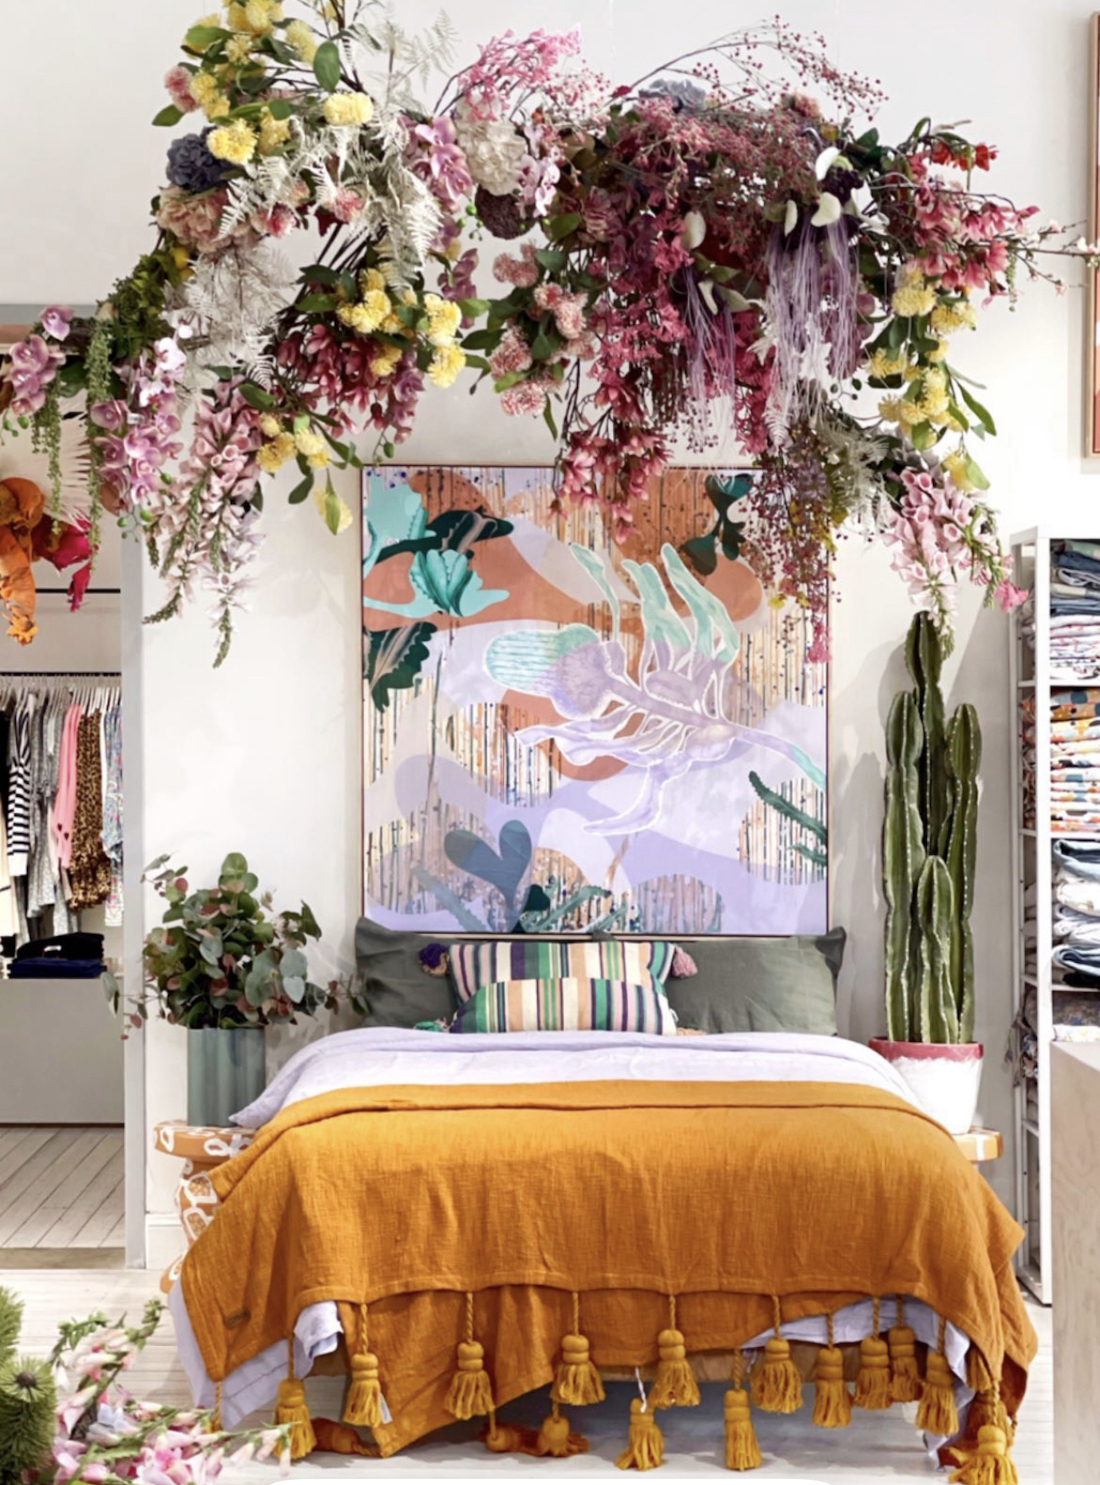 Floral display hanging from ceiling with Sarah Leslie artwork